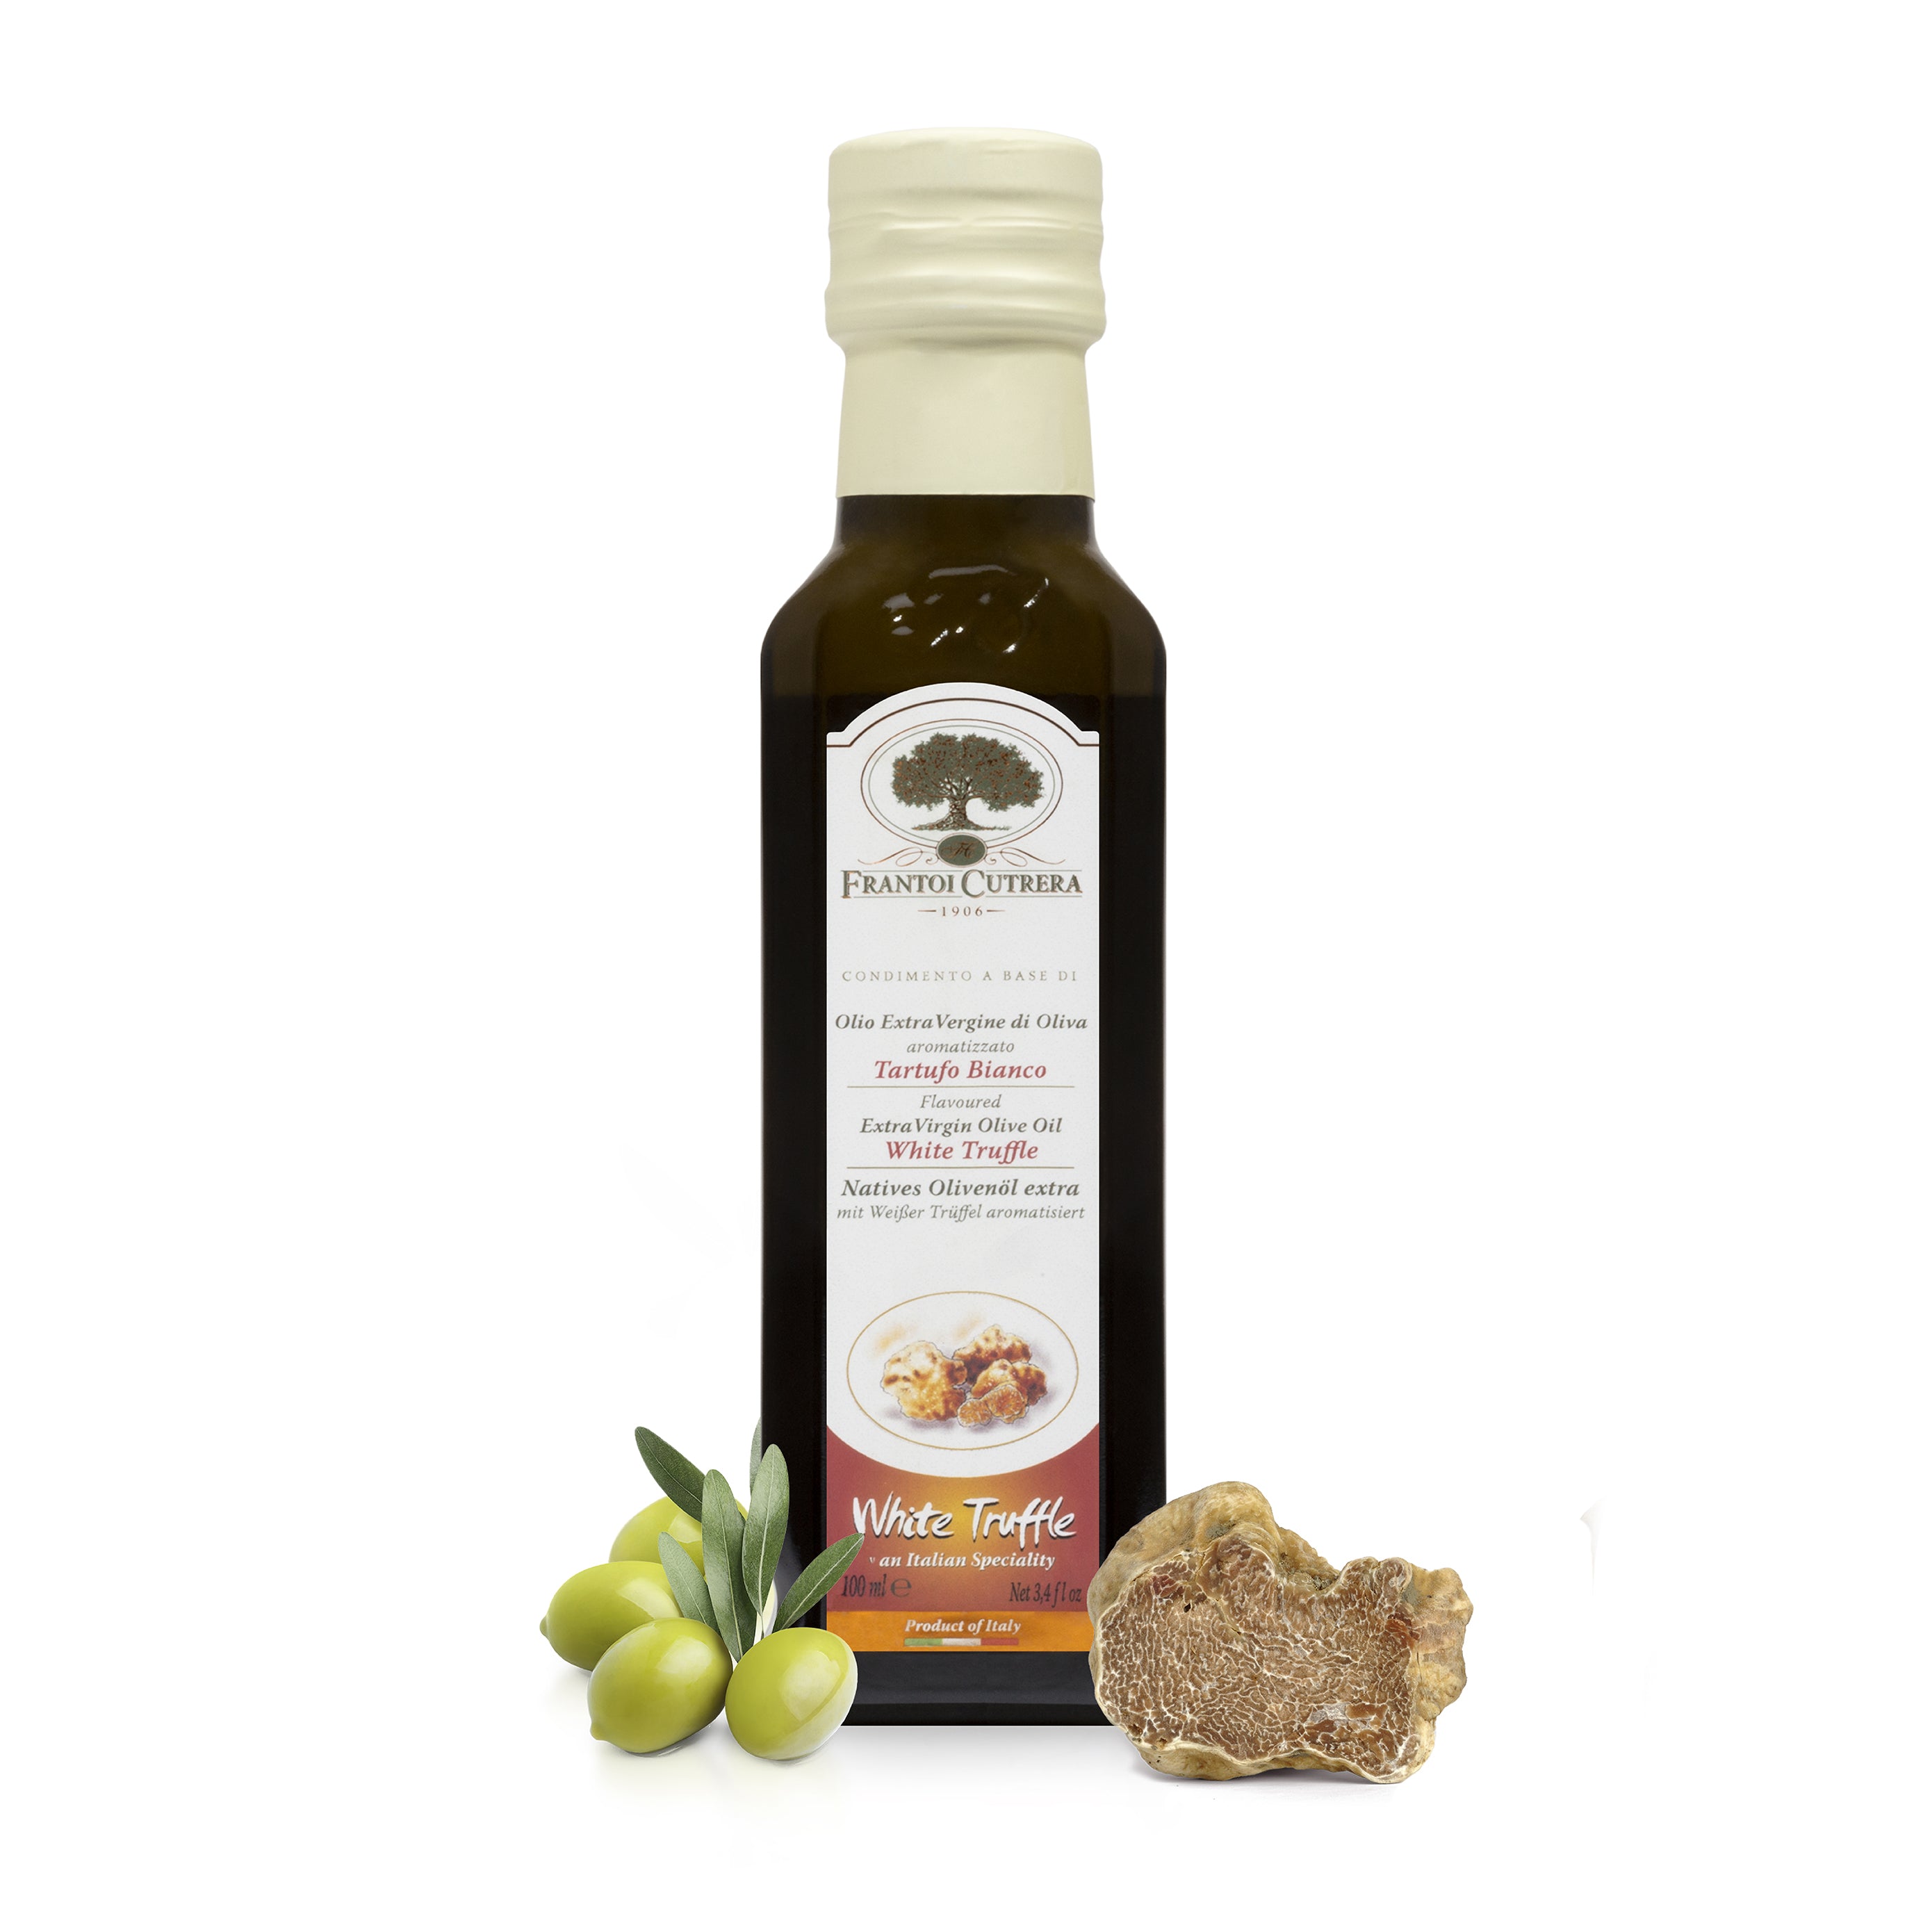 White Truffle Infused Olive Oil by Frantoi Cutrera